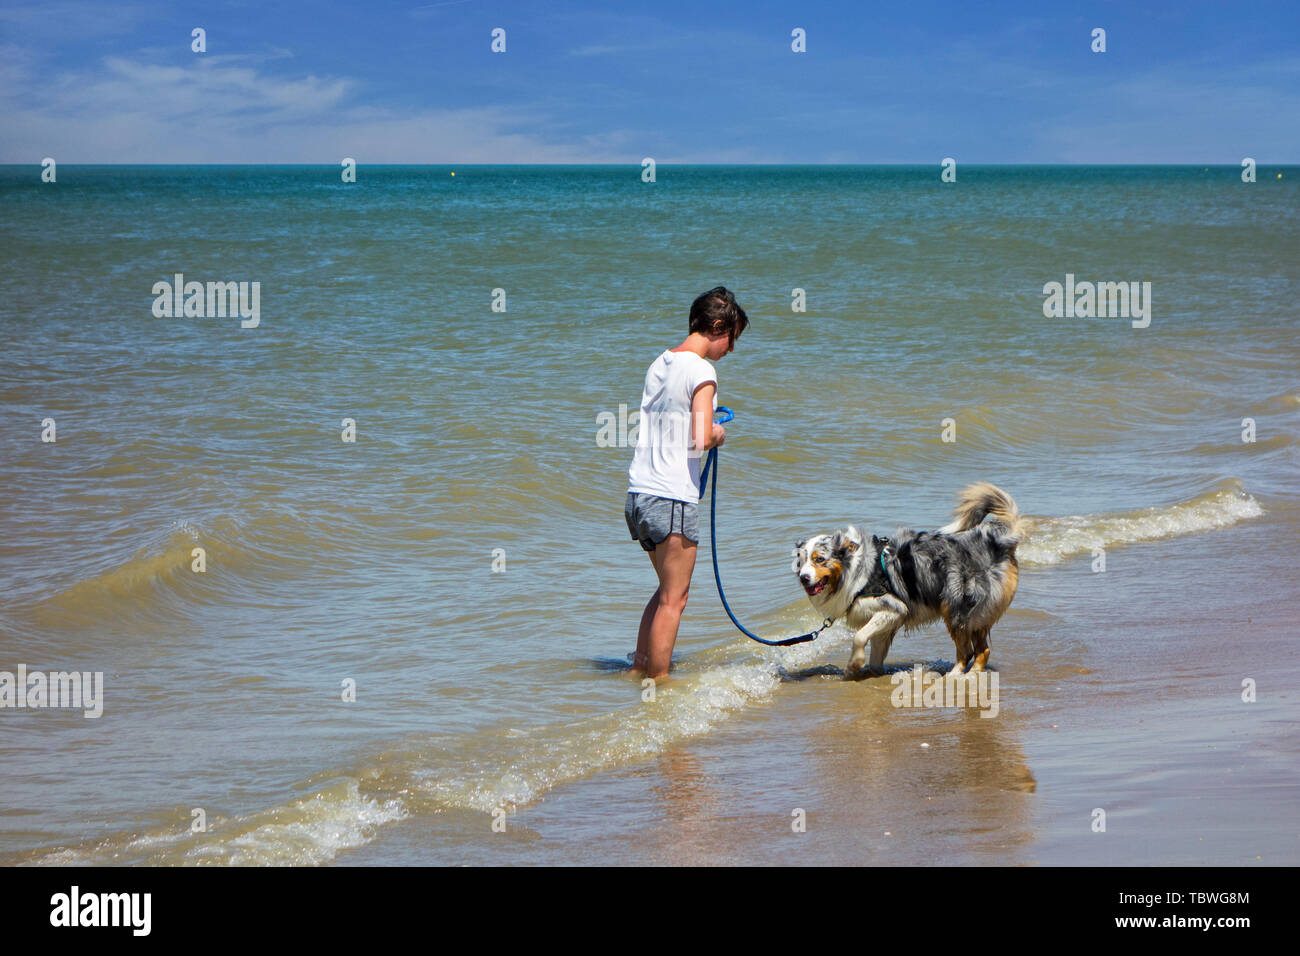 Female dog owner teaching insecure / scared dog to get used to sea water and getting wet by paddling in the surf Stock Photo